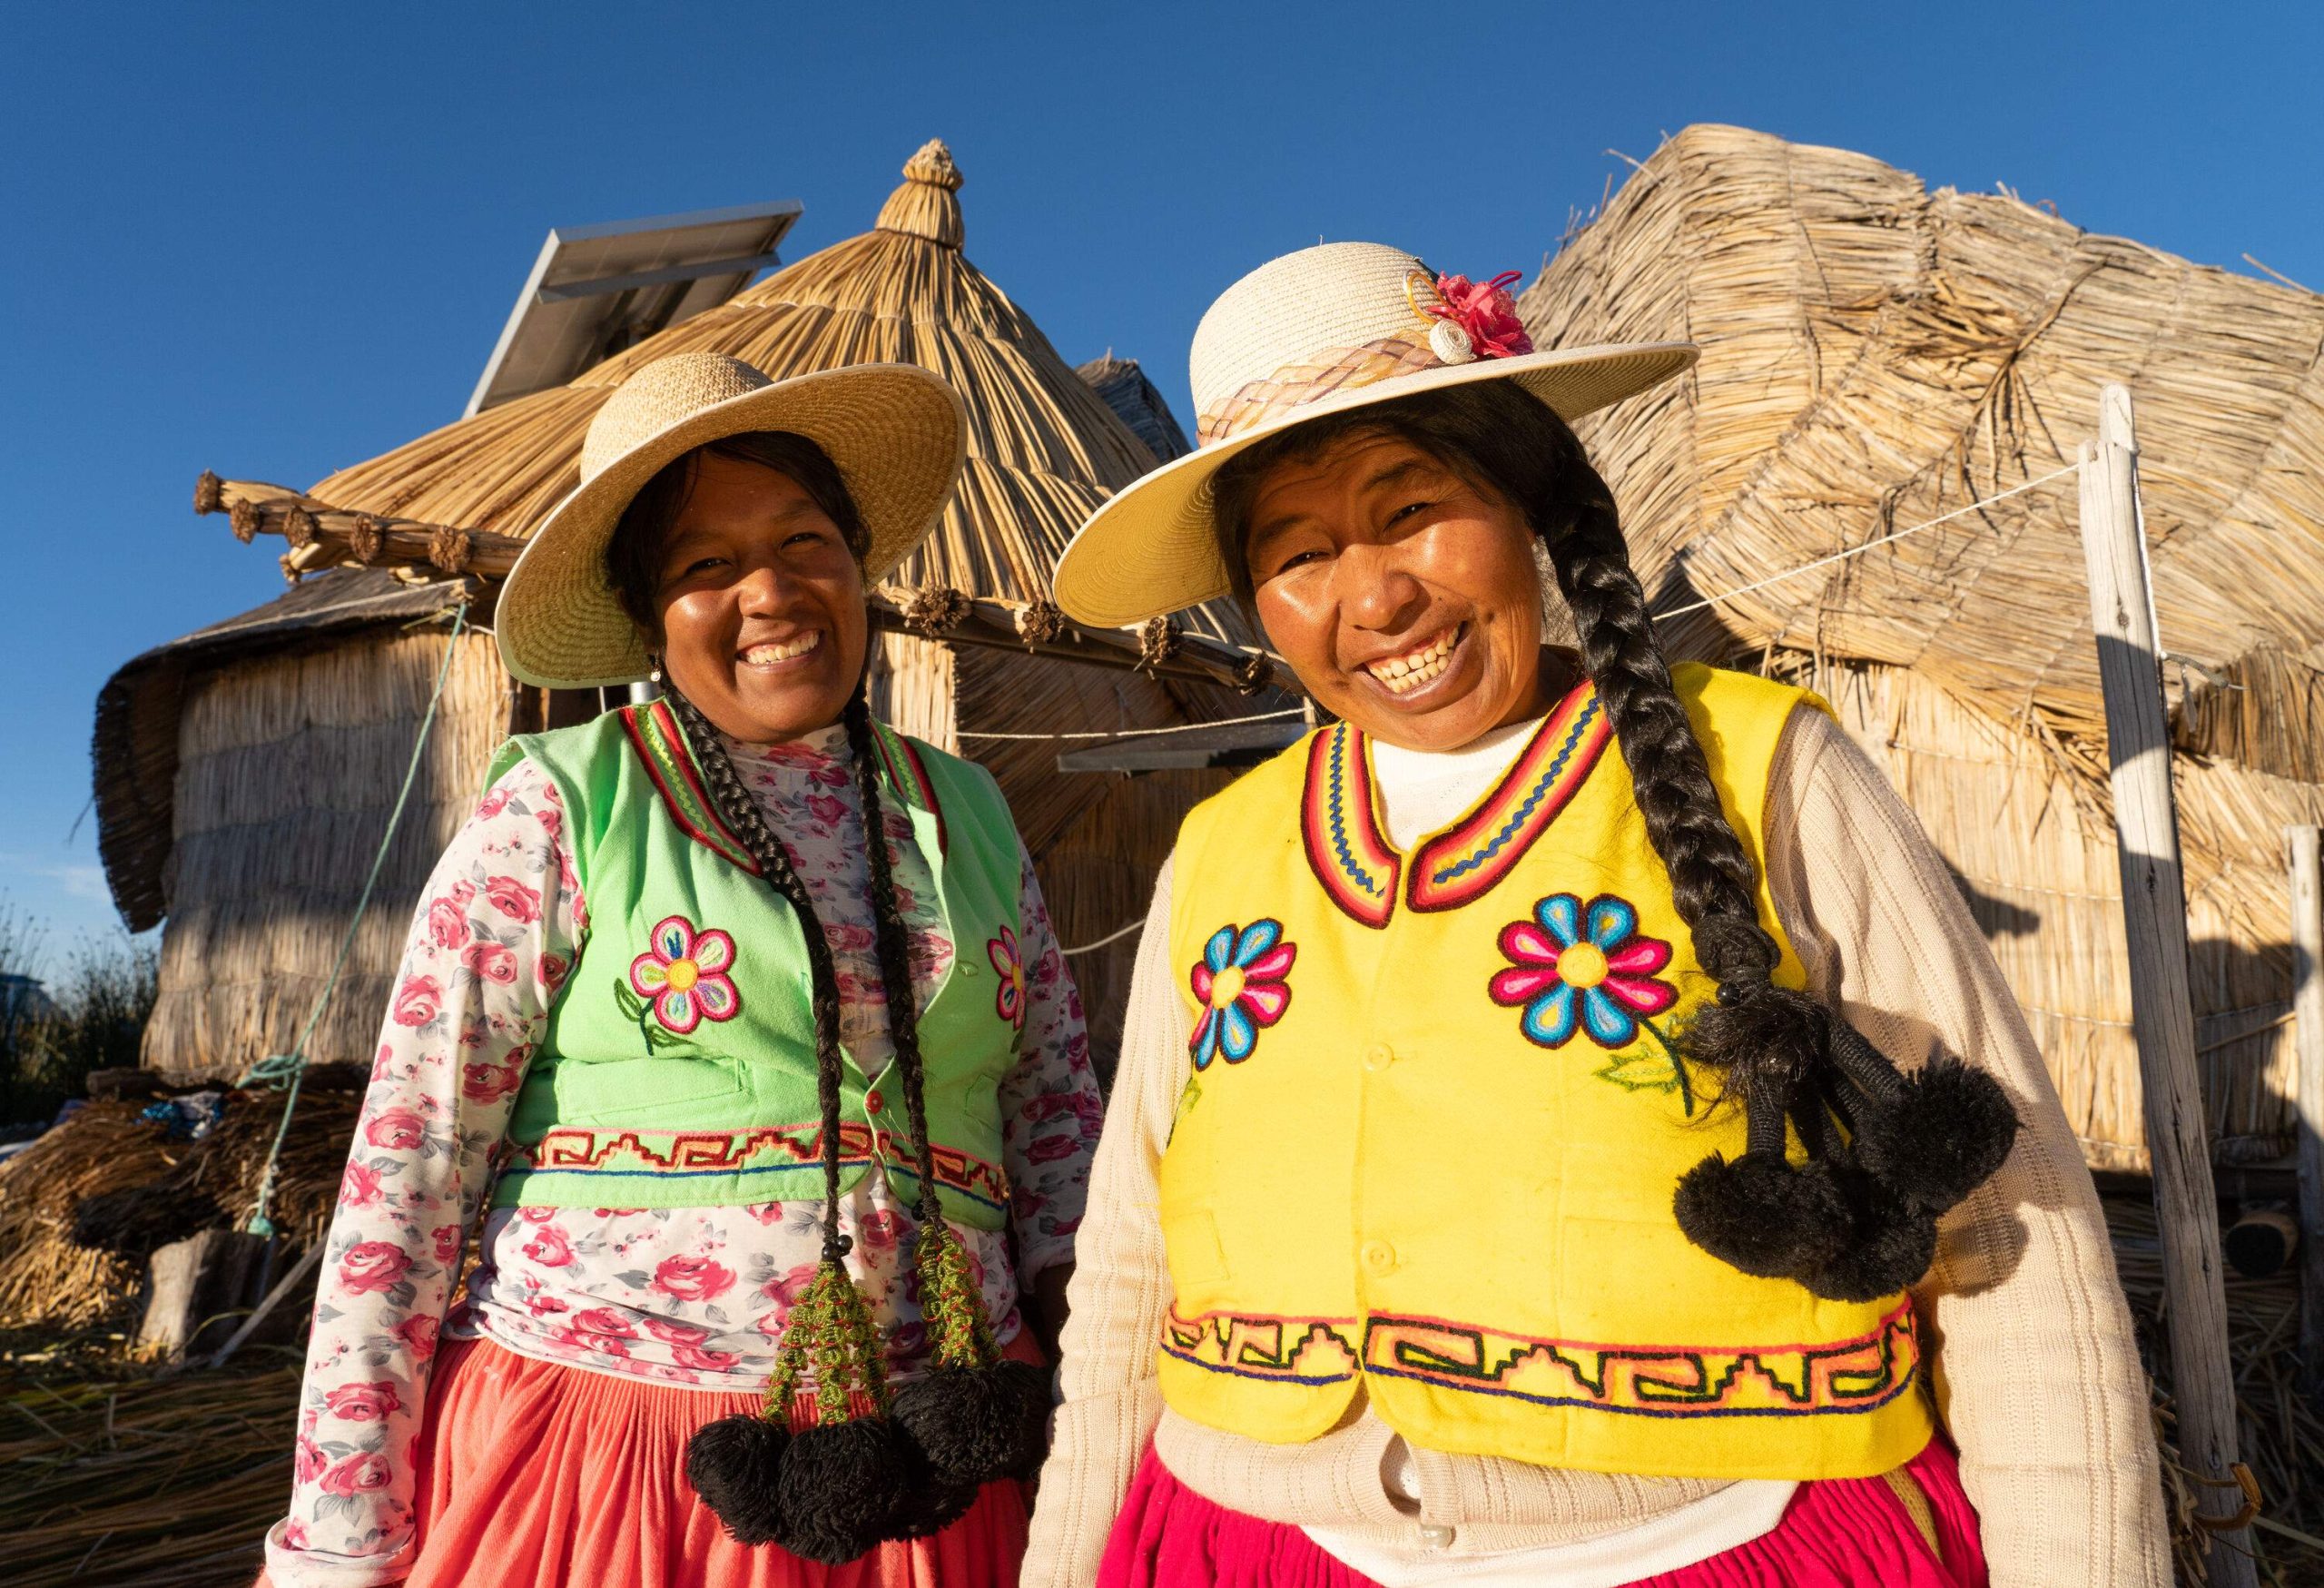 Two indigenous women with traditional peruvian clothing smiling at the camera